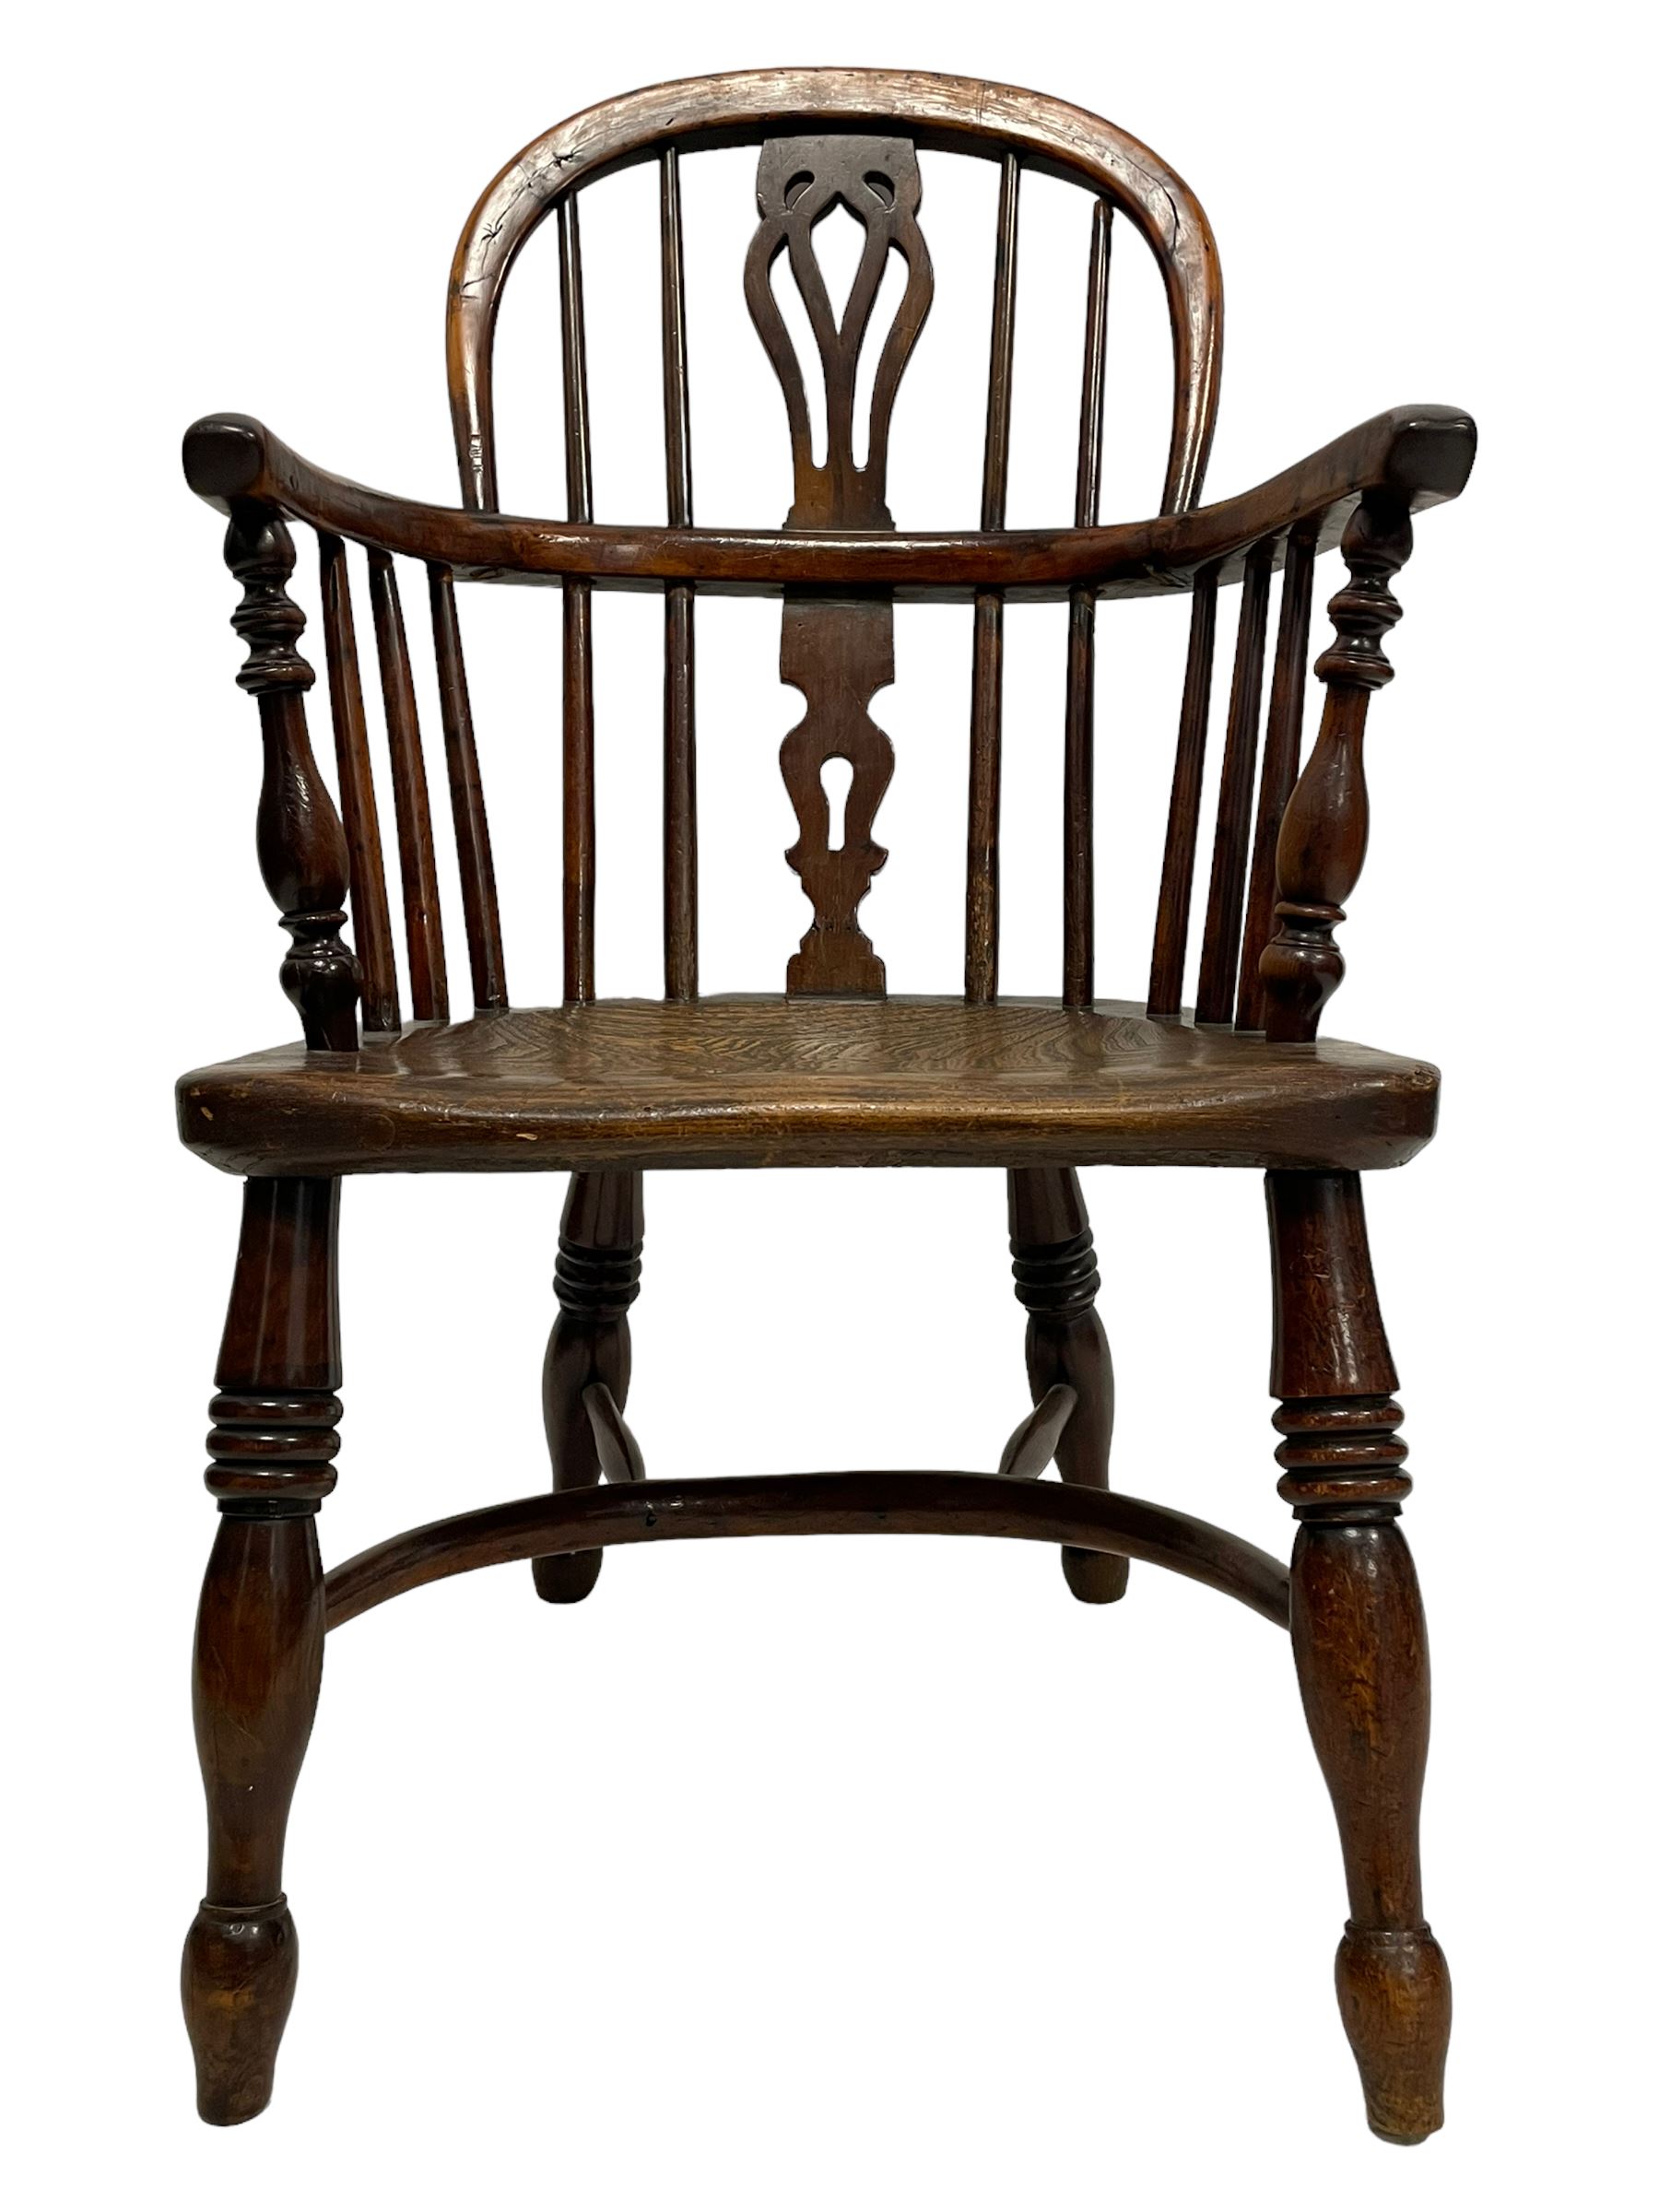 19th century elm and yew child's Windsor chair